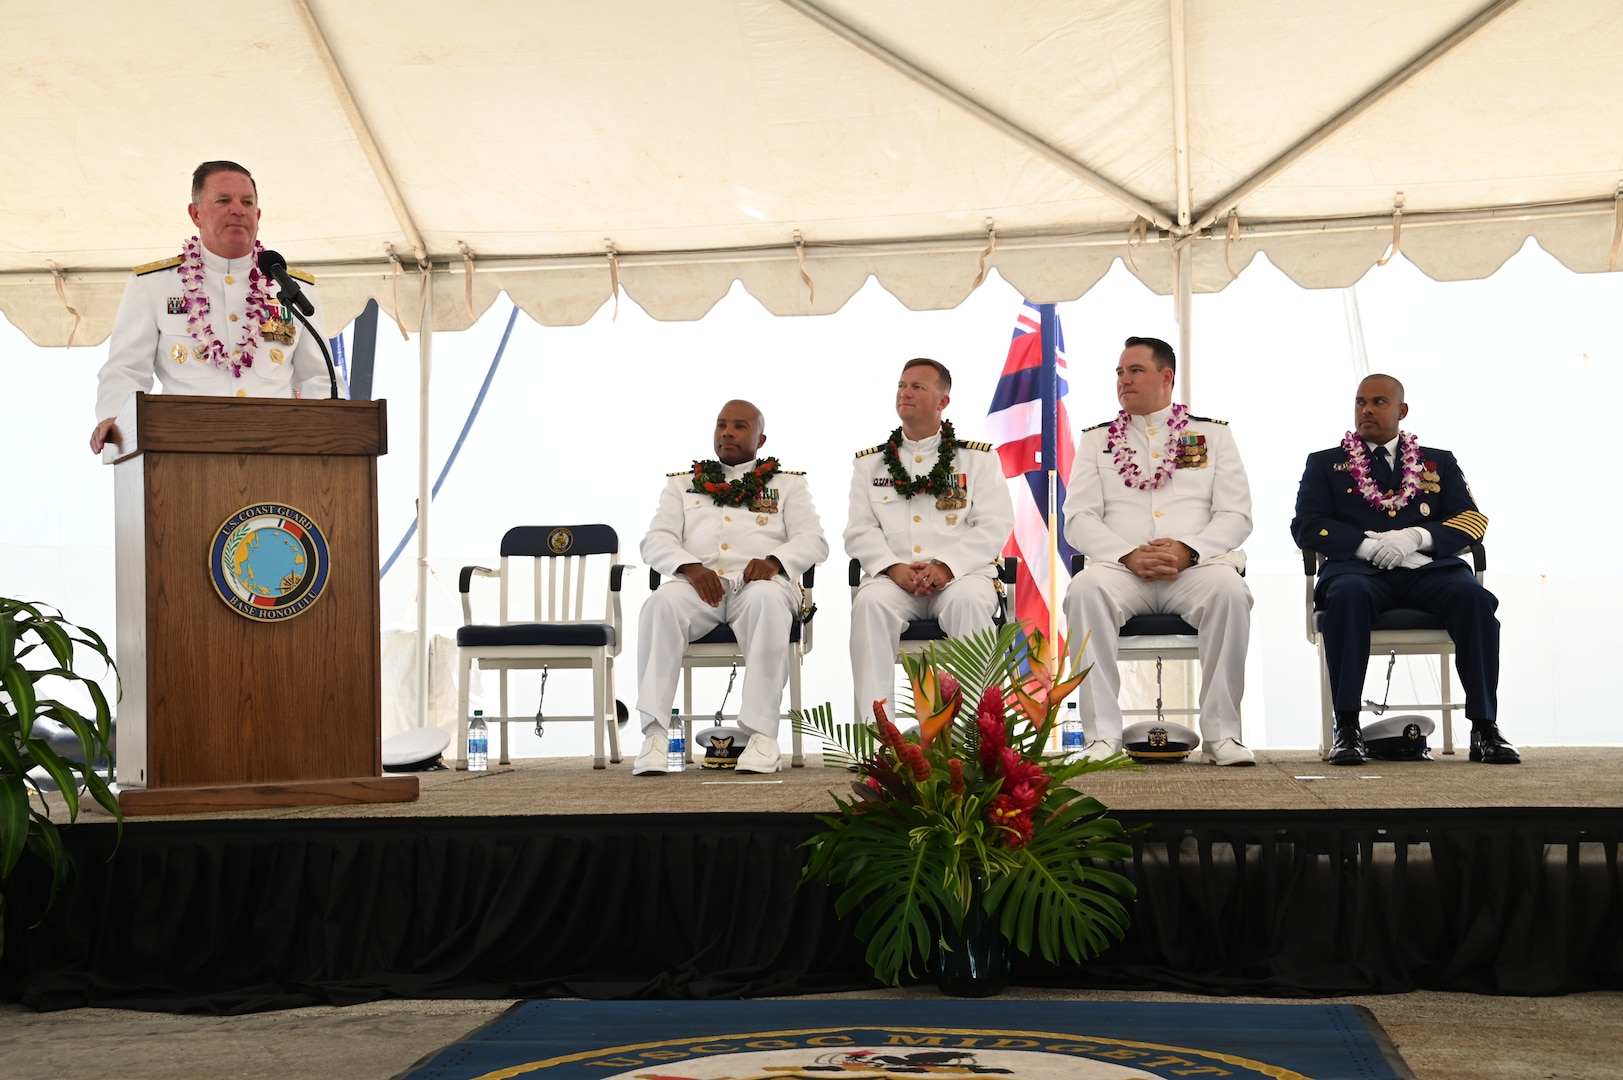 Rear Adm. Brendan C. McPherson, deputy commander of U.S. Coast Guard Pacific Area, speaks during the U.S. Coast Guard Cutter Midgett’s (WMSL 757) change of command ceremony on Coast Guard Base Honolulu, July 20, 2023. McPherson presided over the ceremony in which Capt. Matthew Rooney relieved Capt. Willie Carmichael as Midgett’s commanding officer. U.S. Coast Guard photo by Chief Petty Officer Matthew Masaschi.